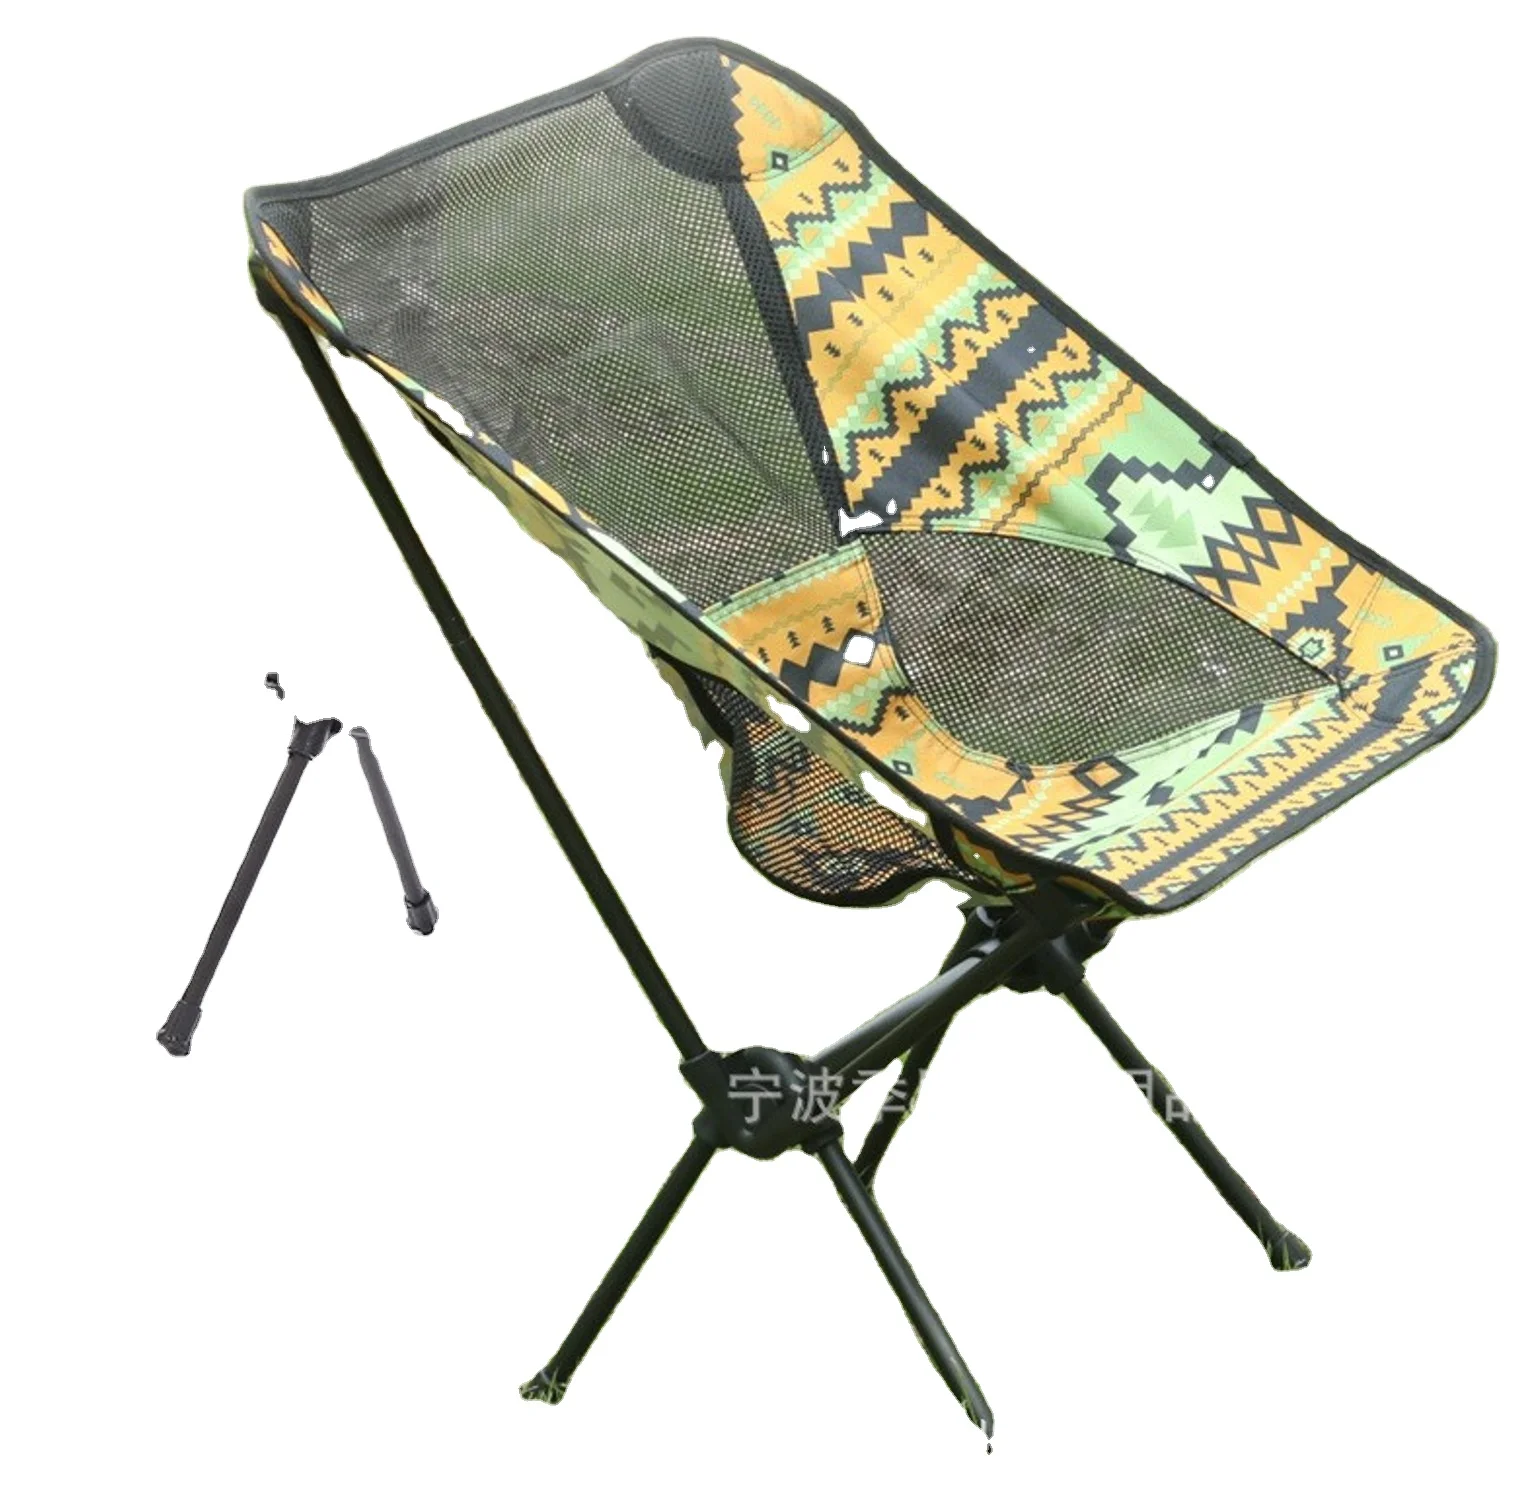 National style super light portable outdoor aluminum folding chair camping moon chair portable actor director chair